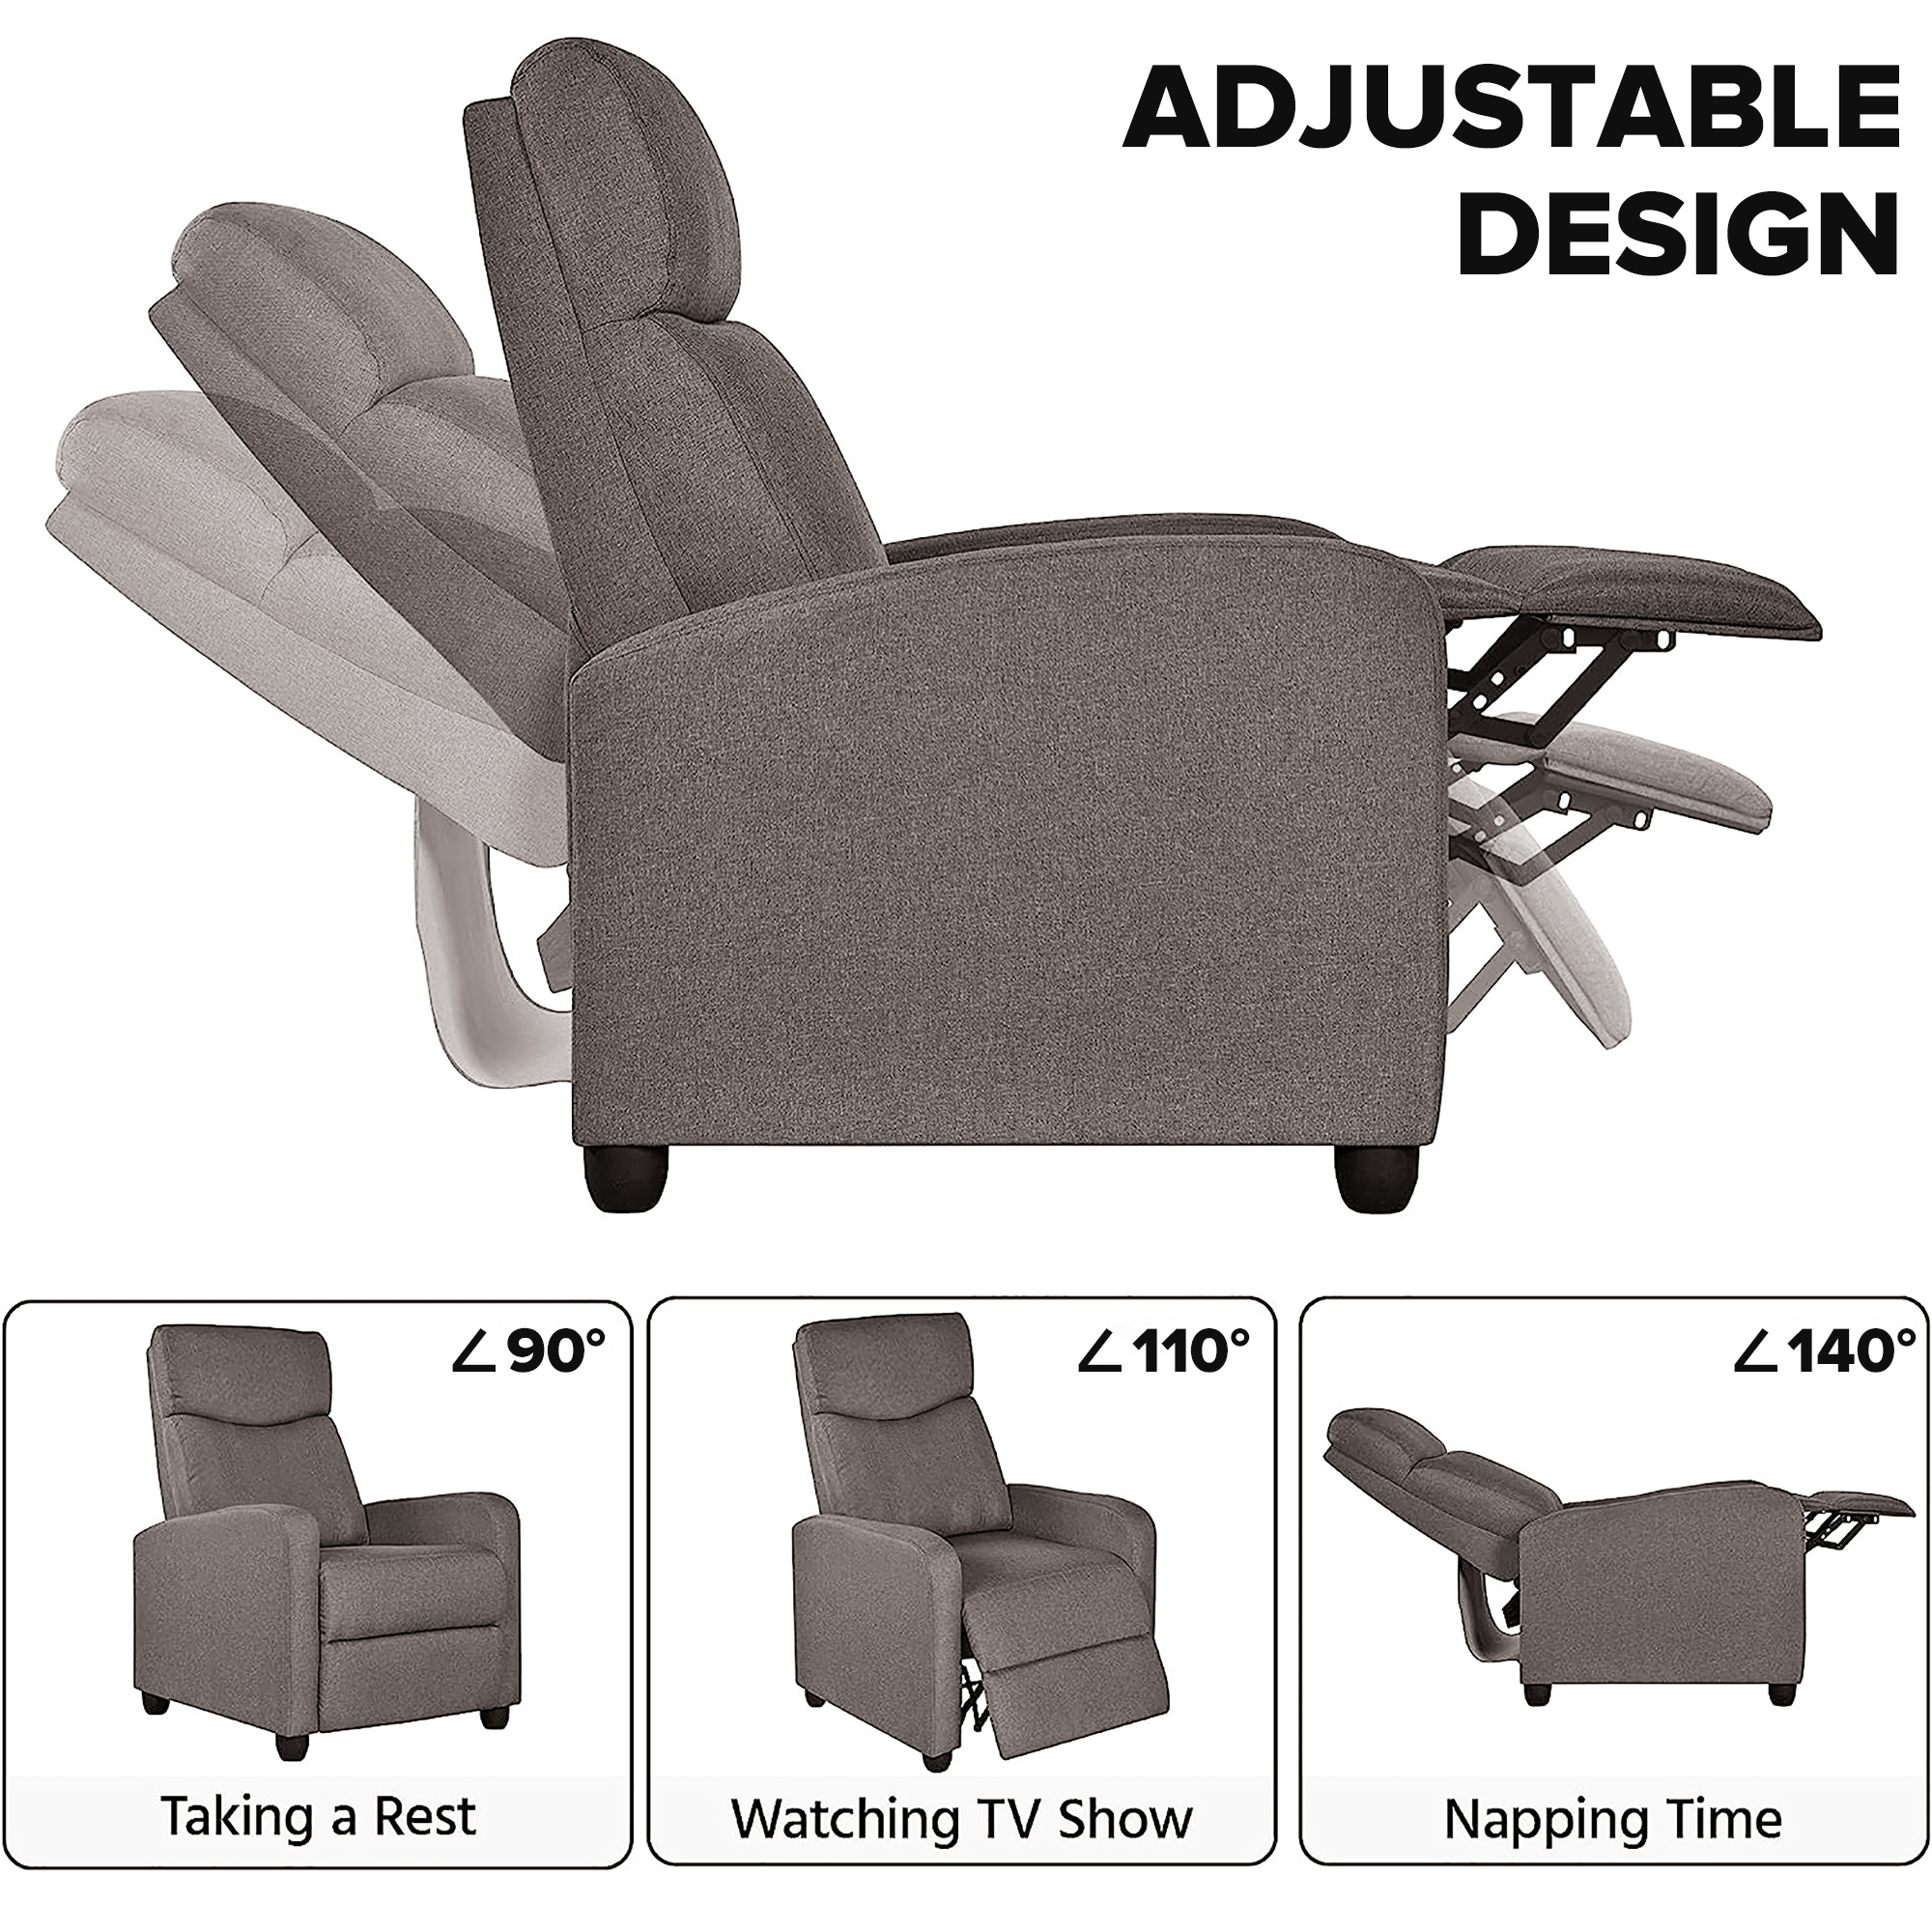 Comhoma Push Back Theater Adjustable Recliner with Footrest, Grey Fabric - image 2 of 8